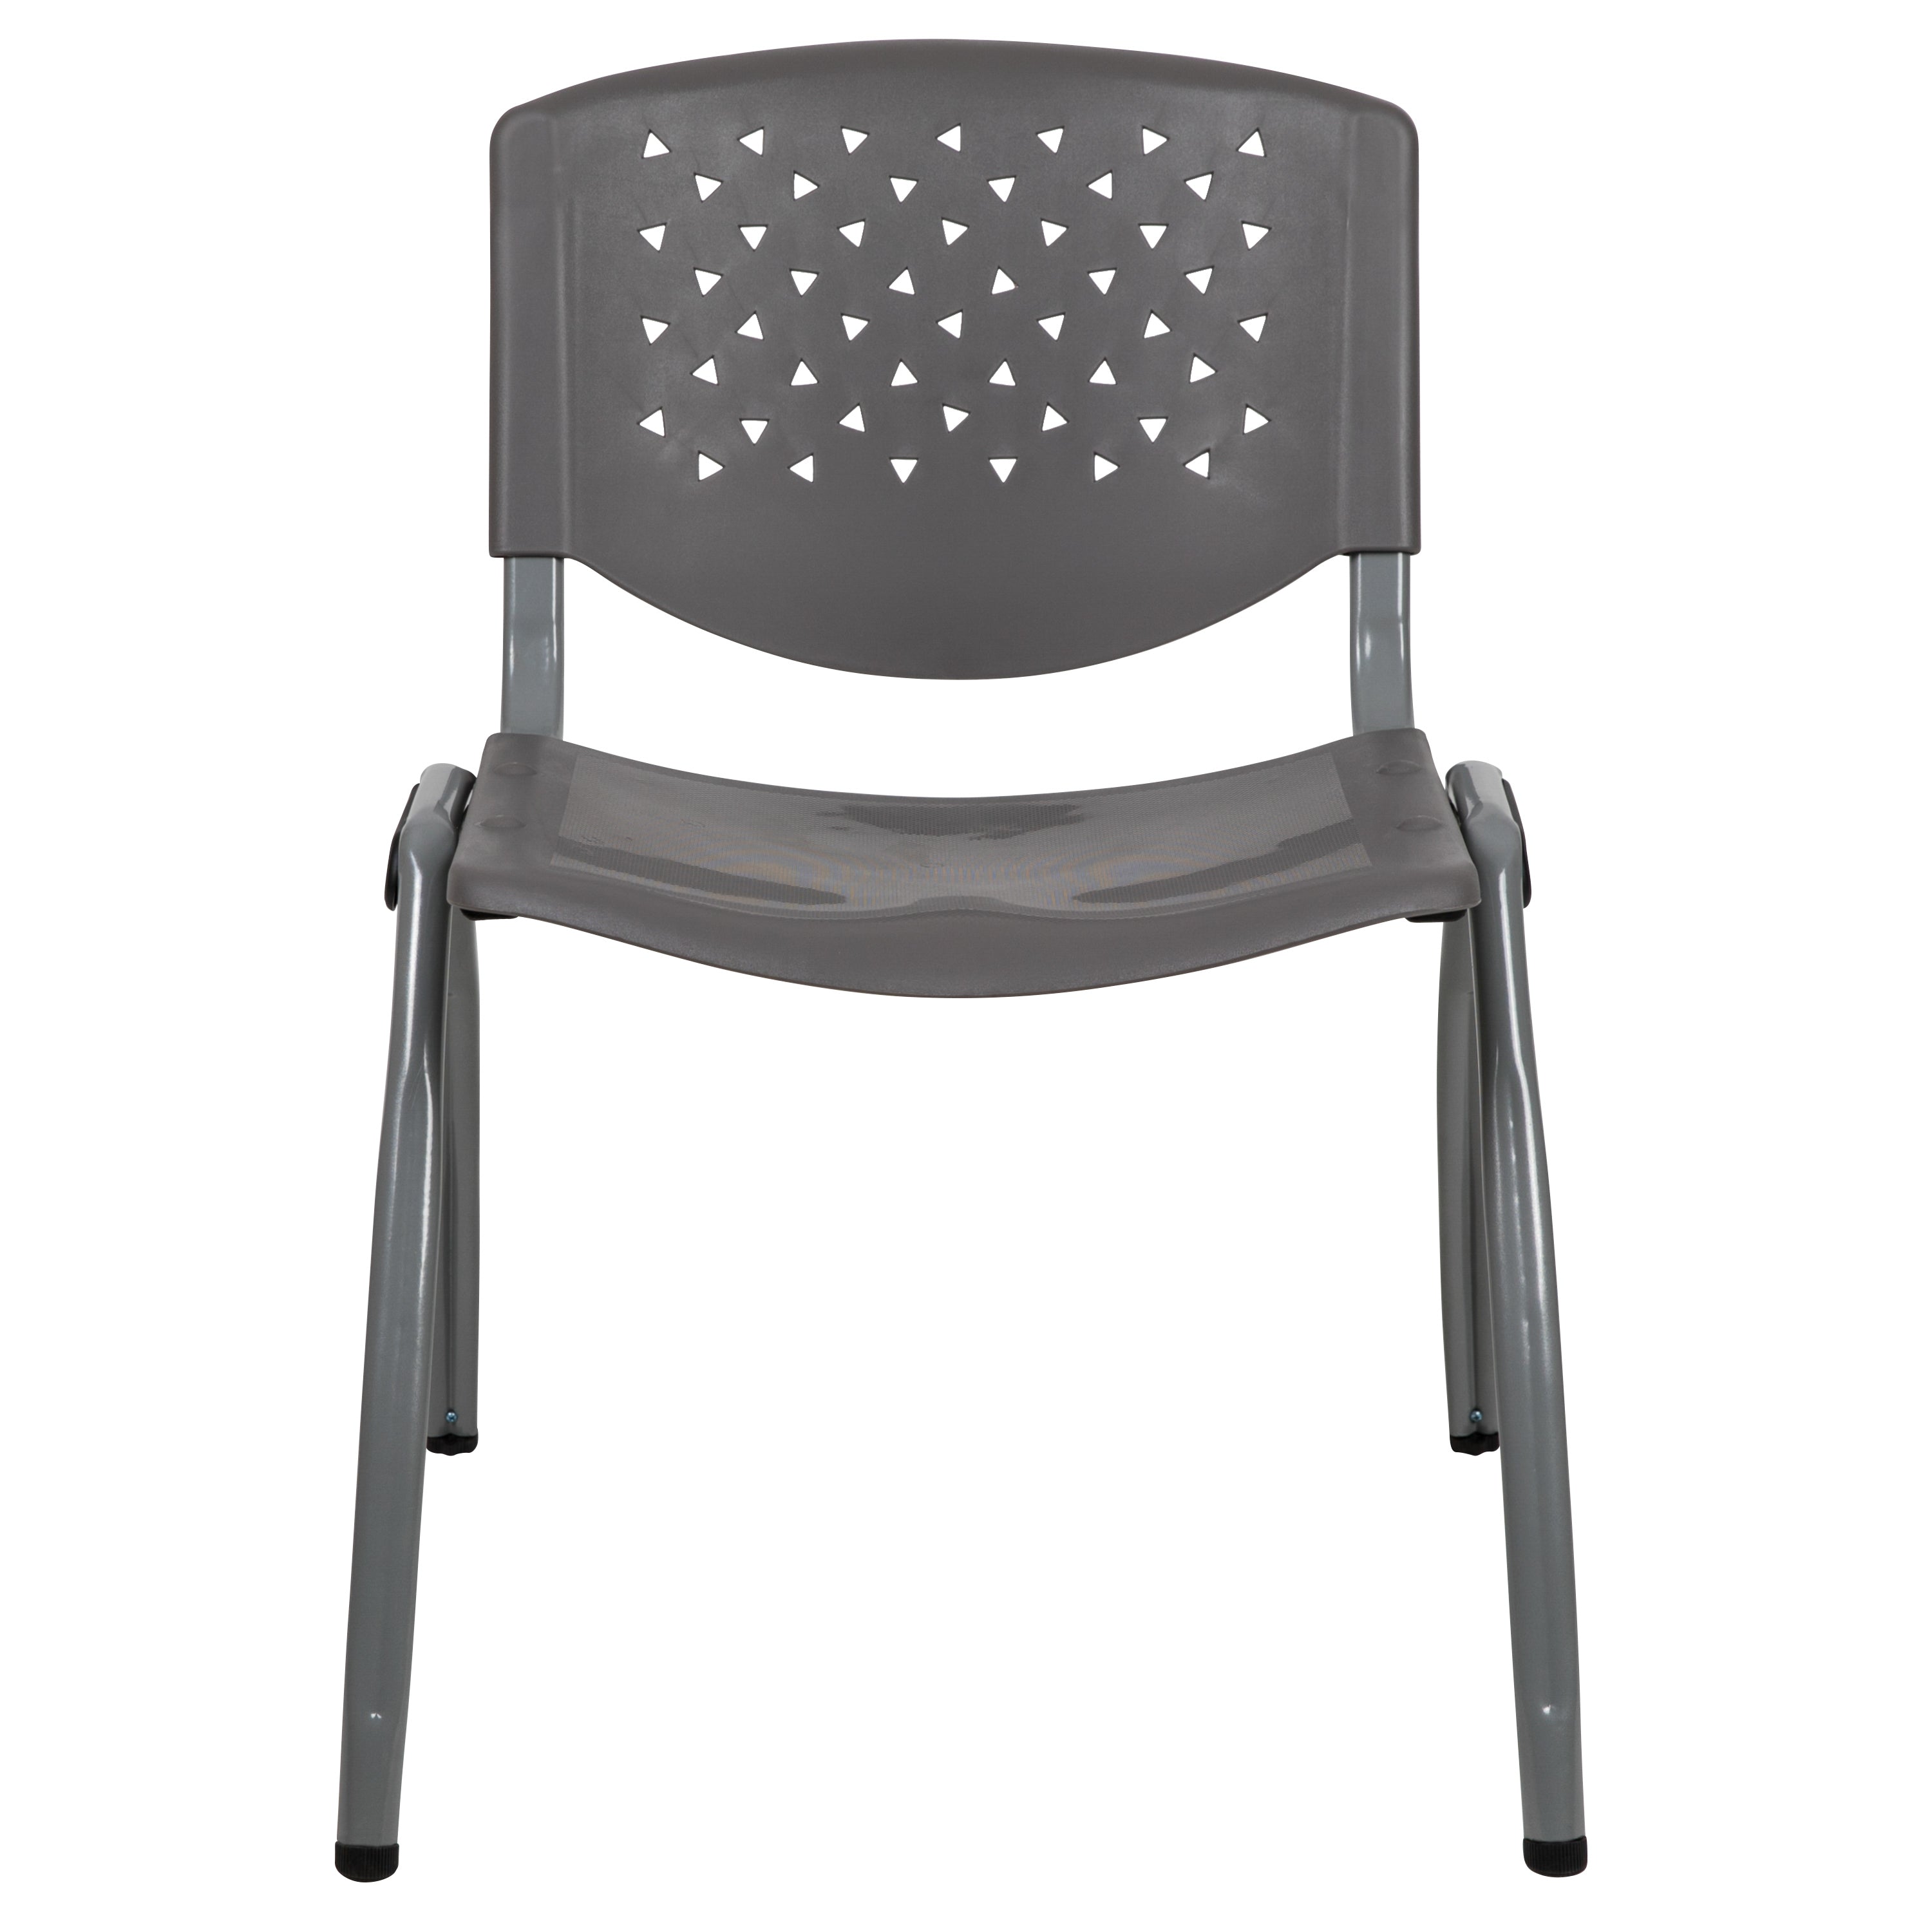 HERCULES Series 880 lb. Capacity Plastic Stack Chair with Powder Coated Frame-Plastic Stack Chair-Flash Furniture-Wall2Wall Furnishings